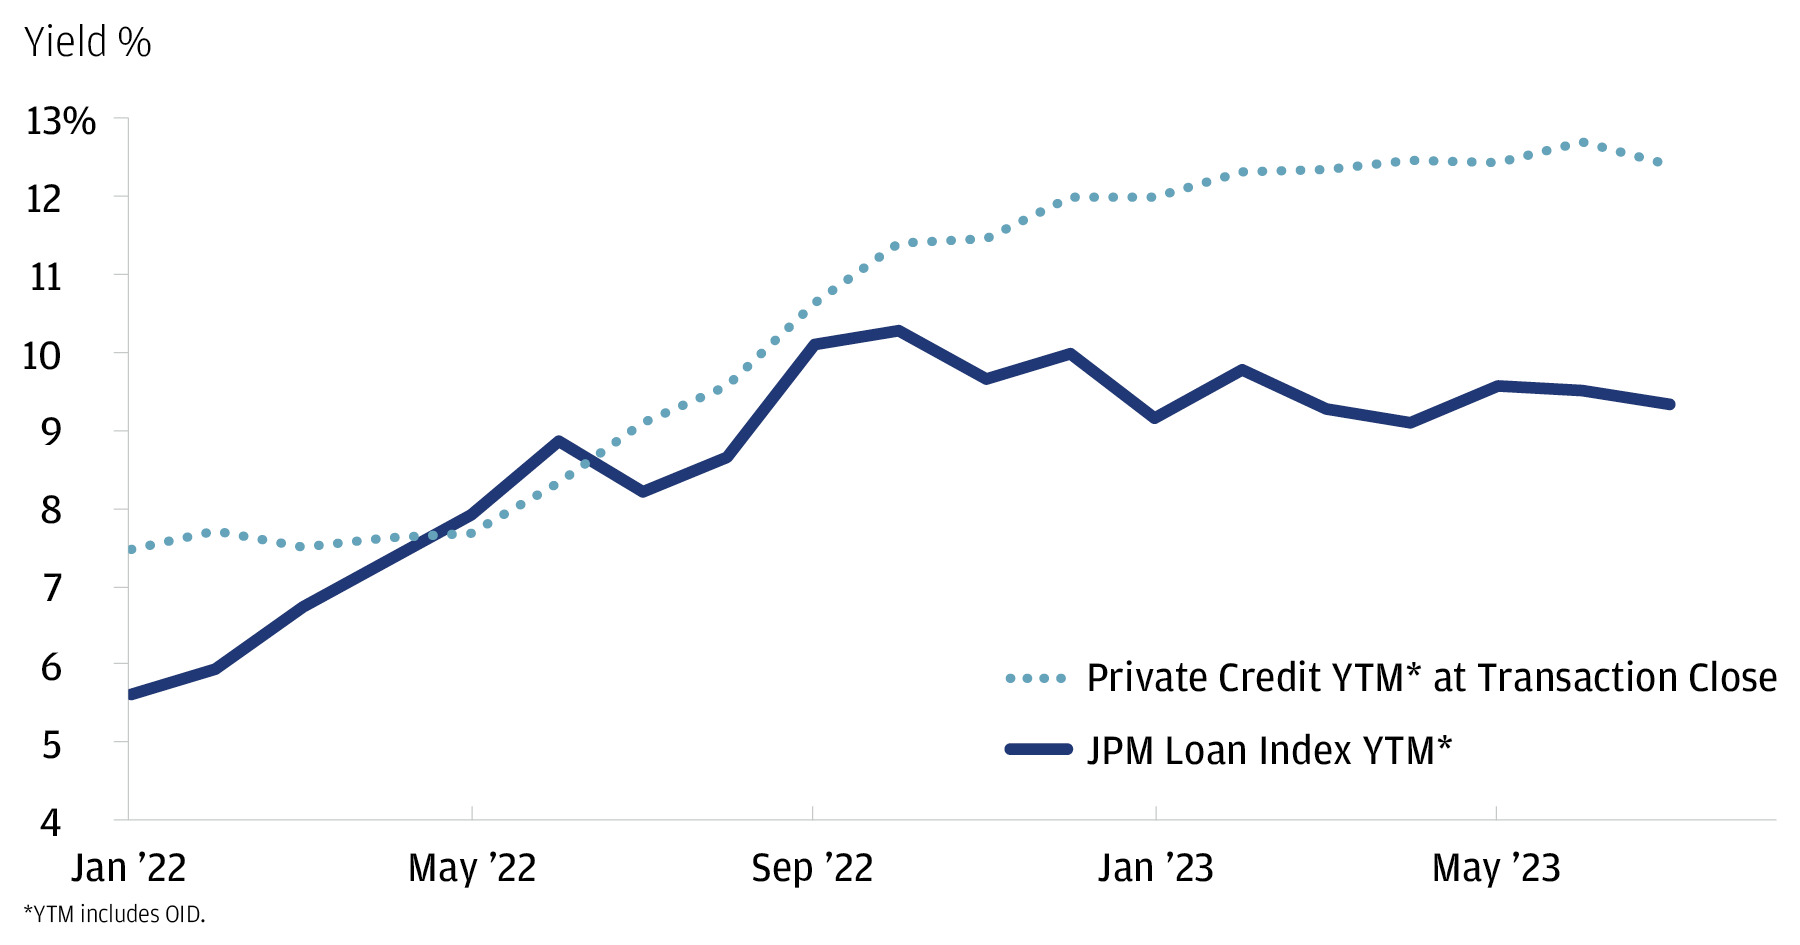 The chart shows yields for JPM Loan Index and private credit new deals at transaction close.